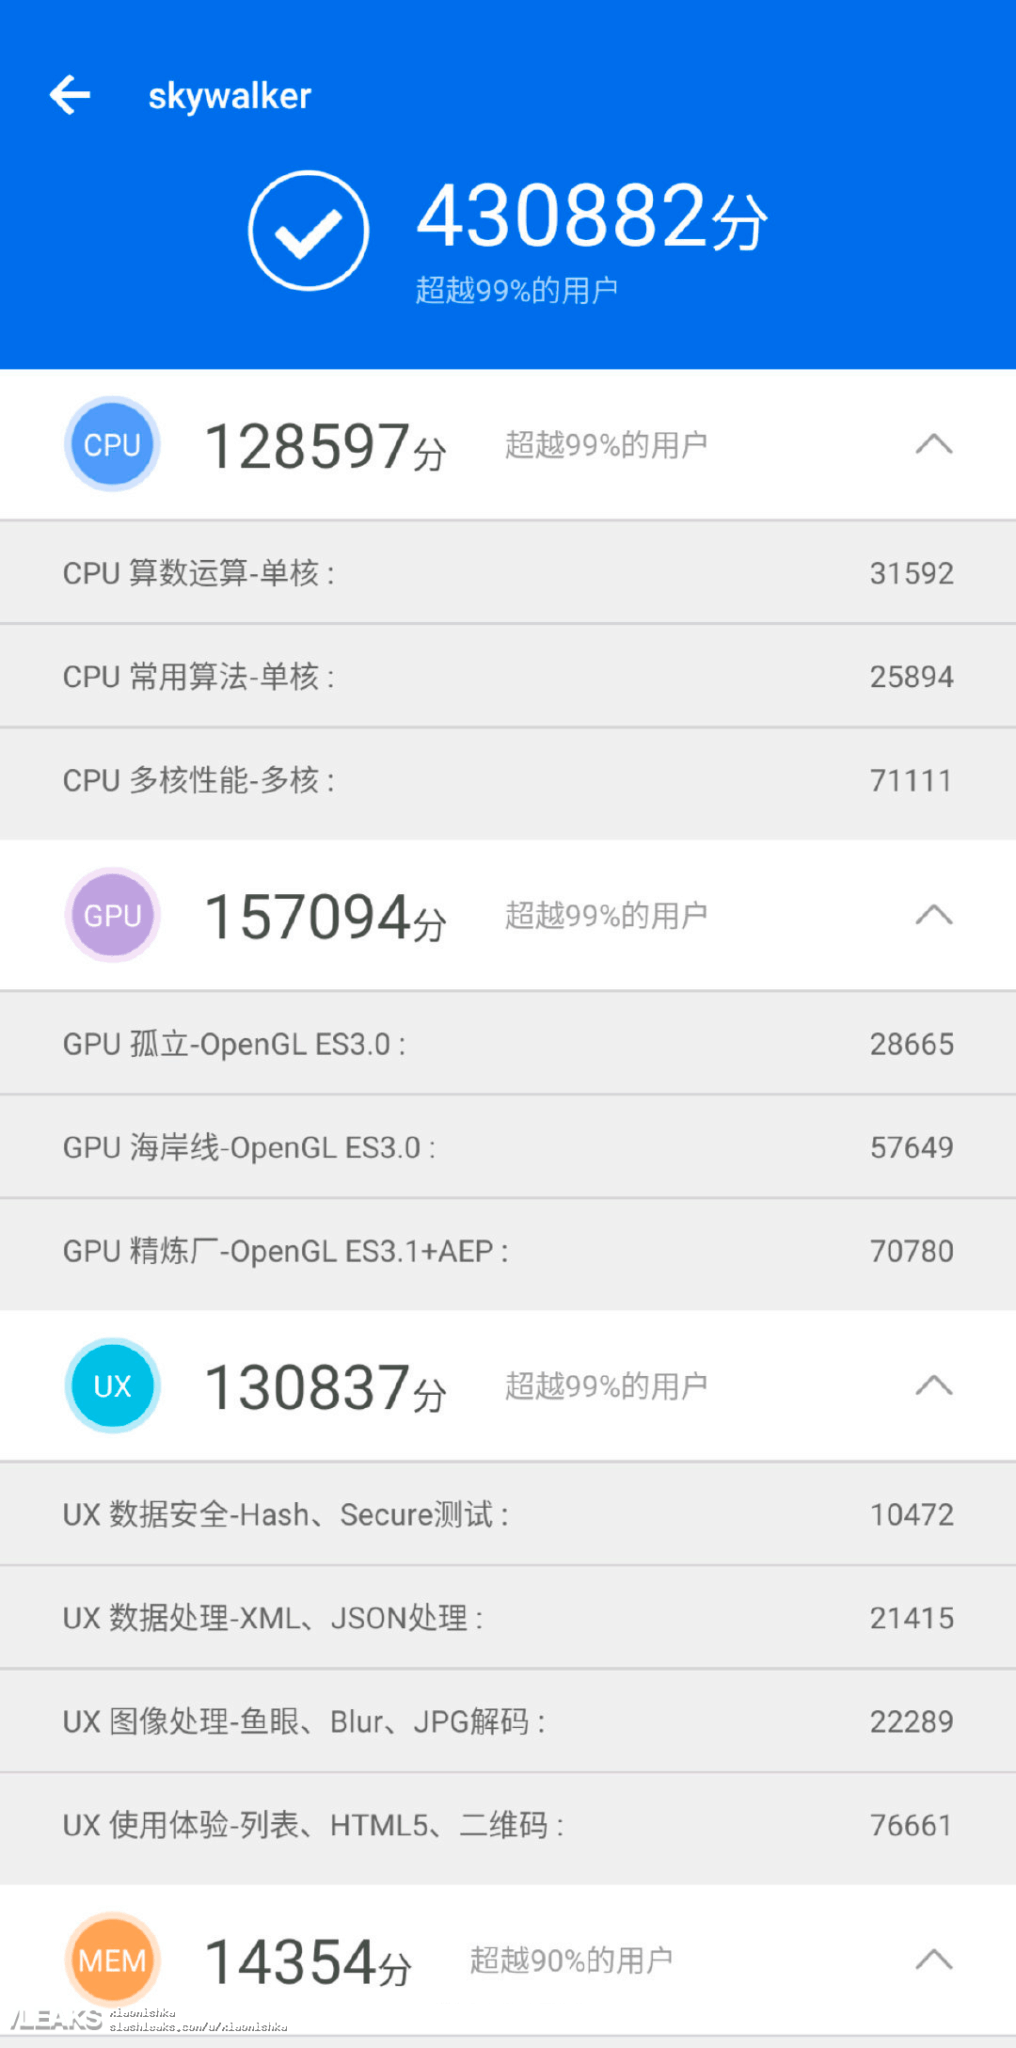 Black shark 2 hits more than 400k points in antutu